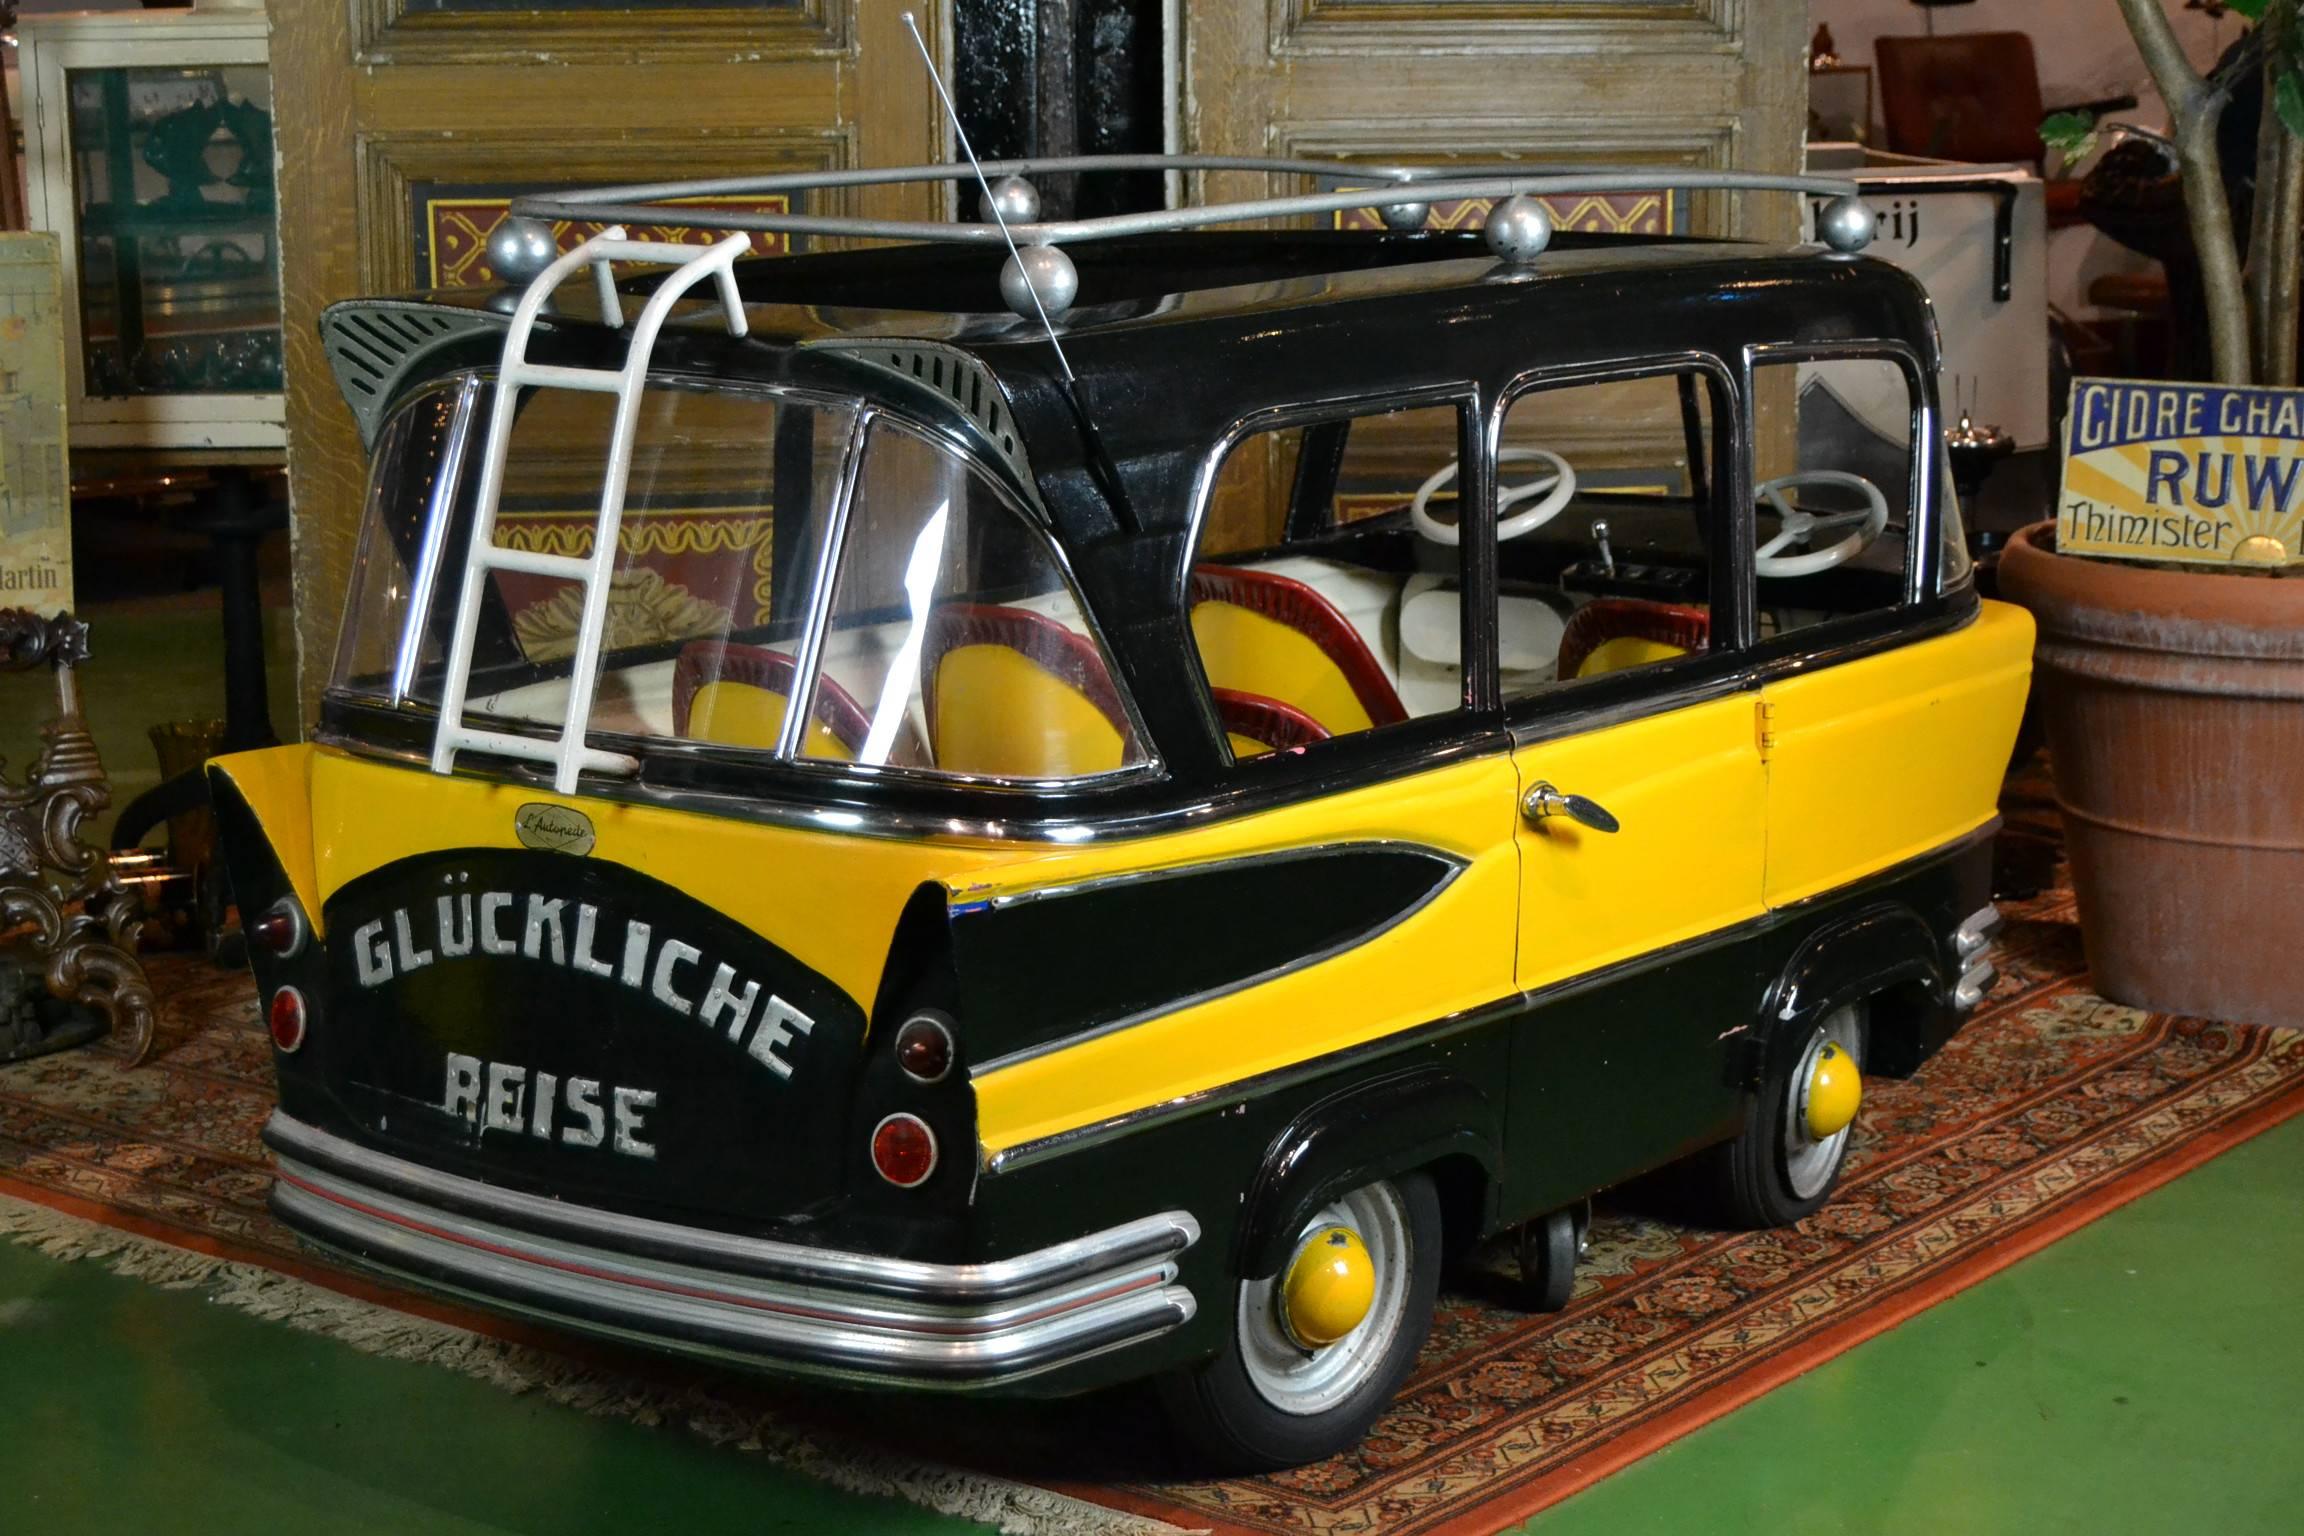 Stunning handmade metal ( ! ) one Door - children's carousel bus - Fairground motorbus made by L'Autopède Belgium 1950s.

This is the eldest version of this model made with Antenna. This was changed very quickly because it was too dangerous. When